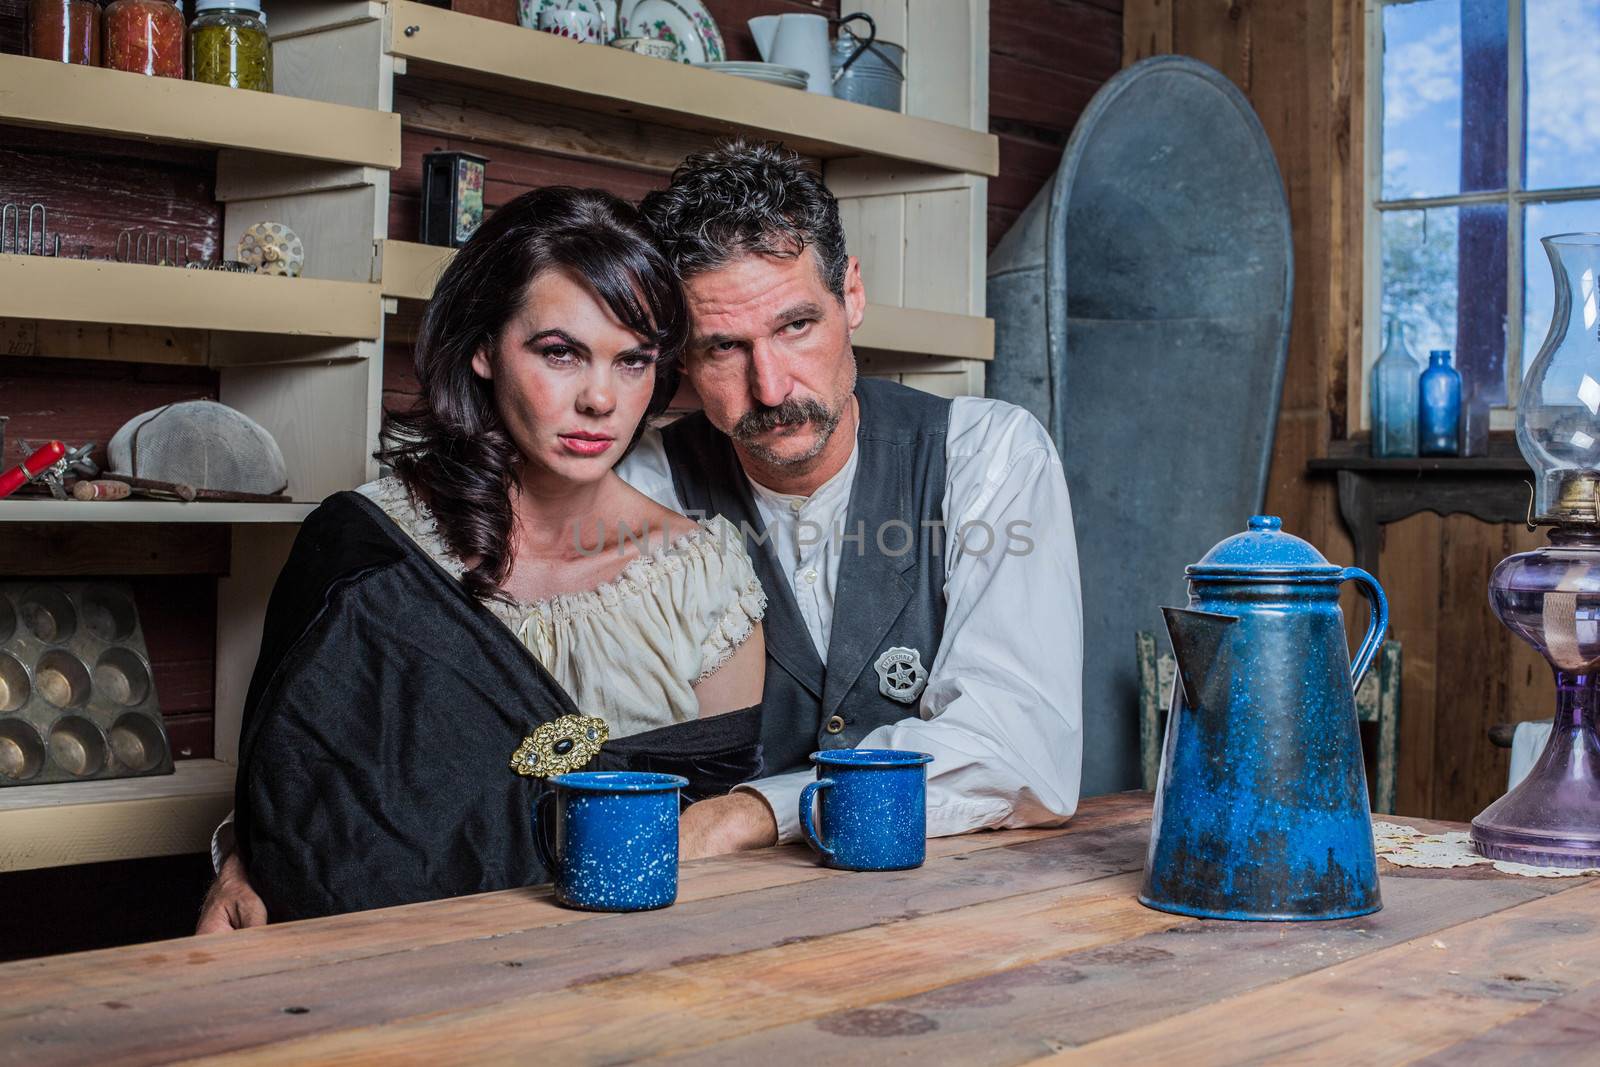 Serious Western Sheriff and Woman Pose Inside House  by Creatista